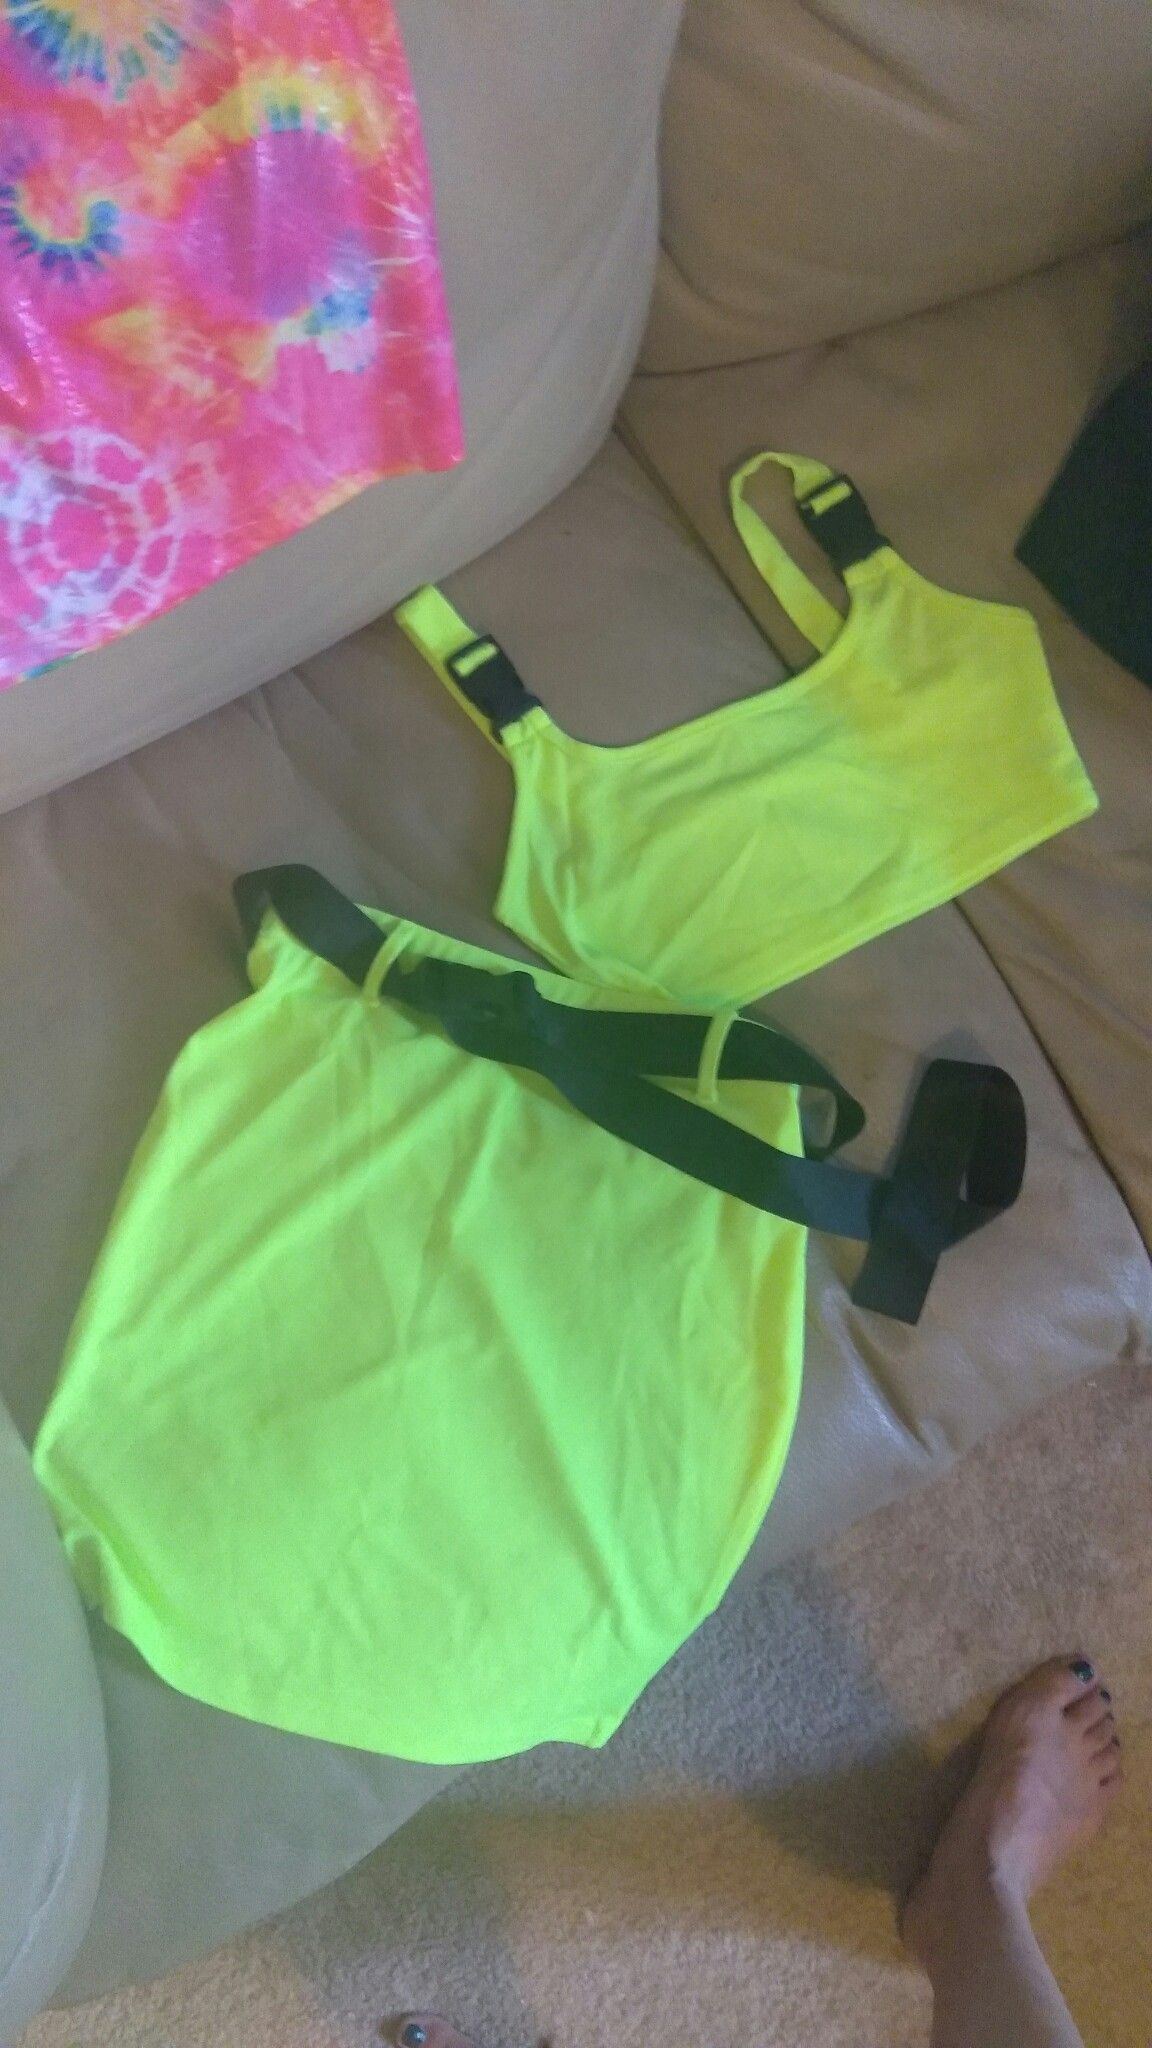 NEW RAVE CLOTHES SMALL SZ